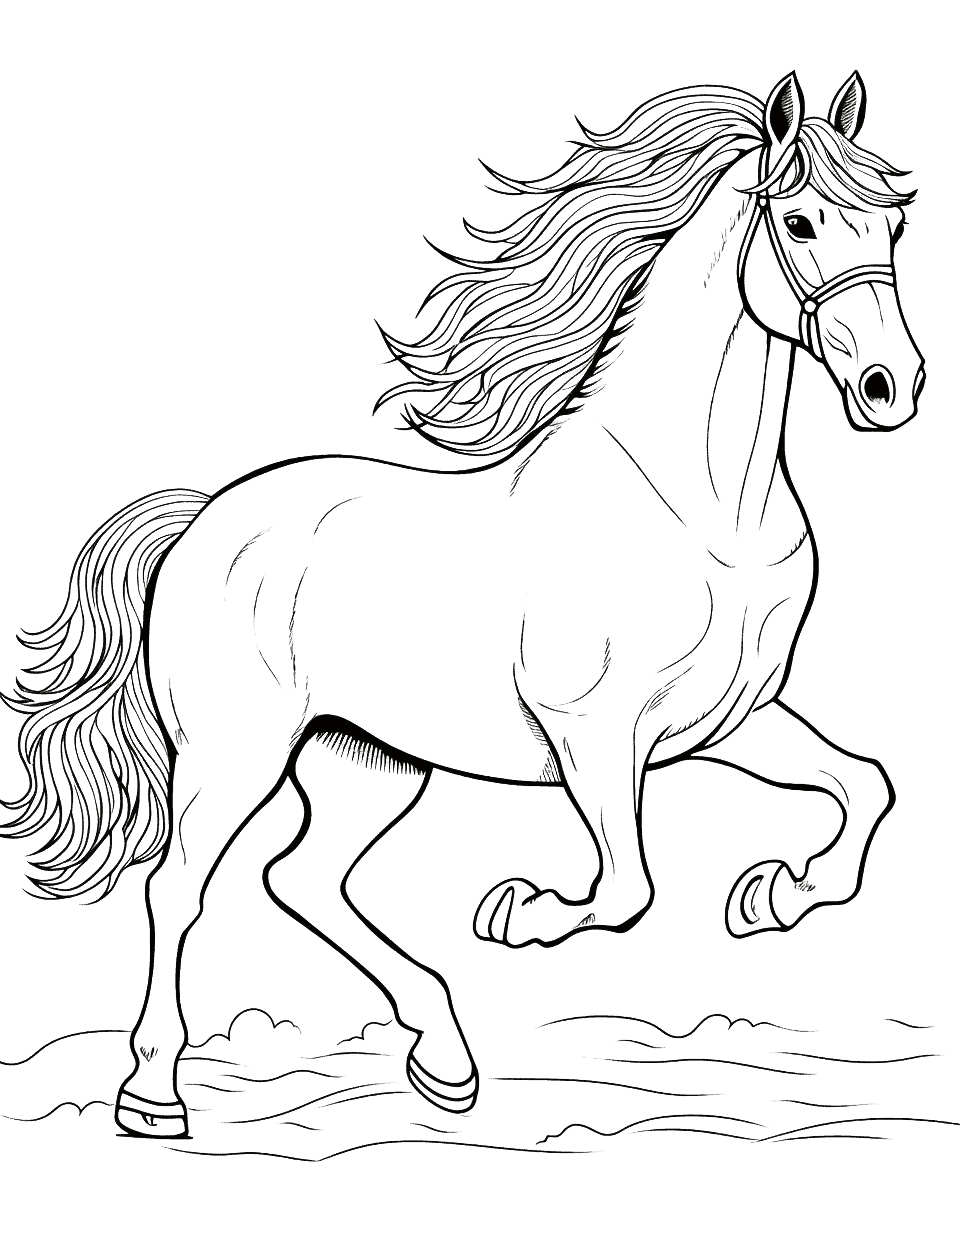 Friesian Horse Majesty Coloring Page - A majestic Friesian horse trotting with its flowing mane and tail.